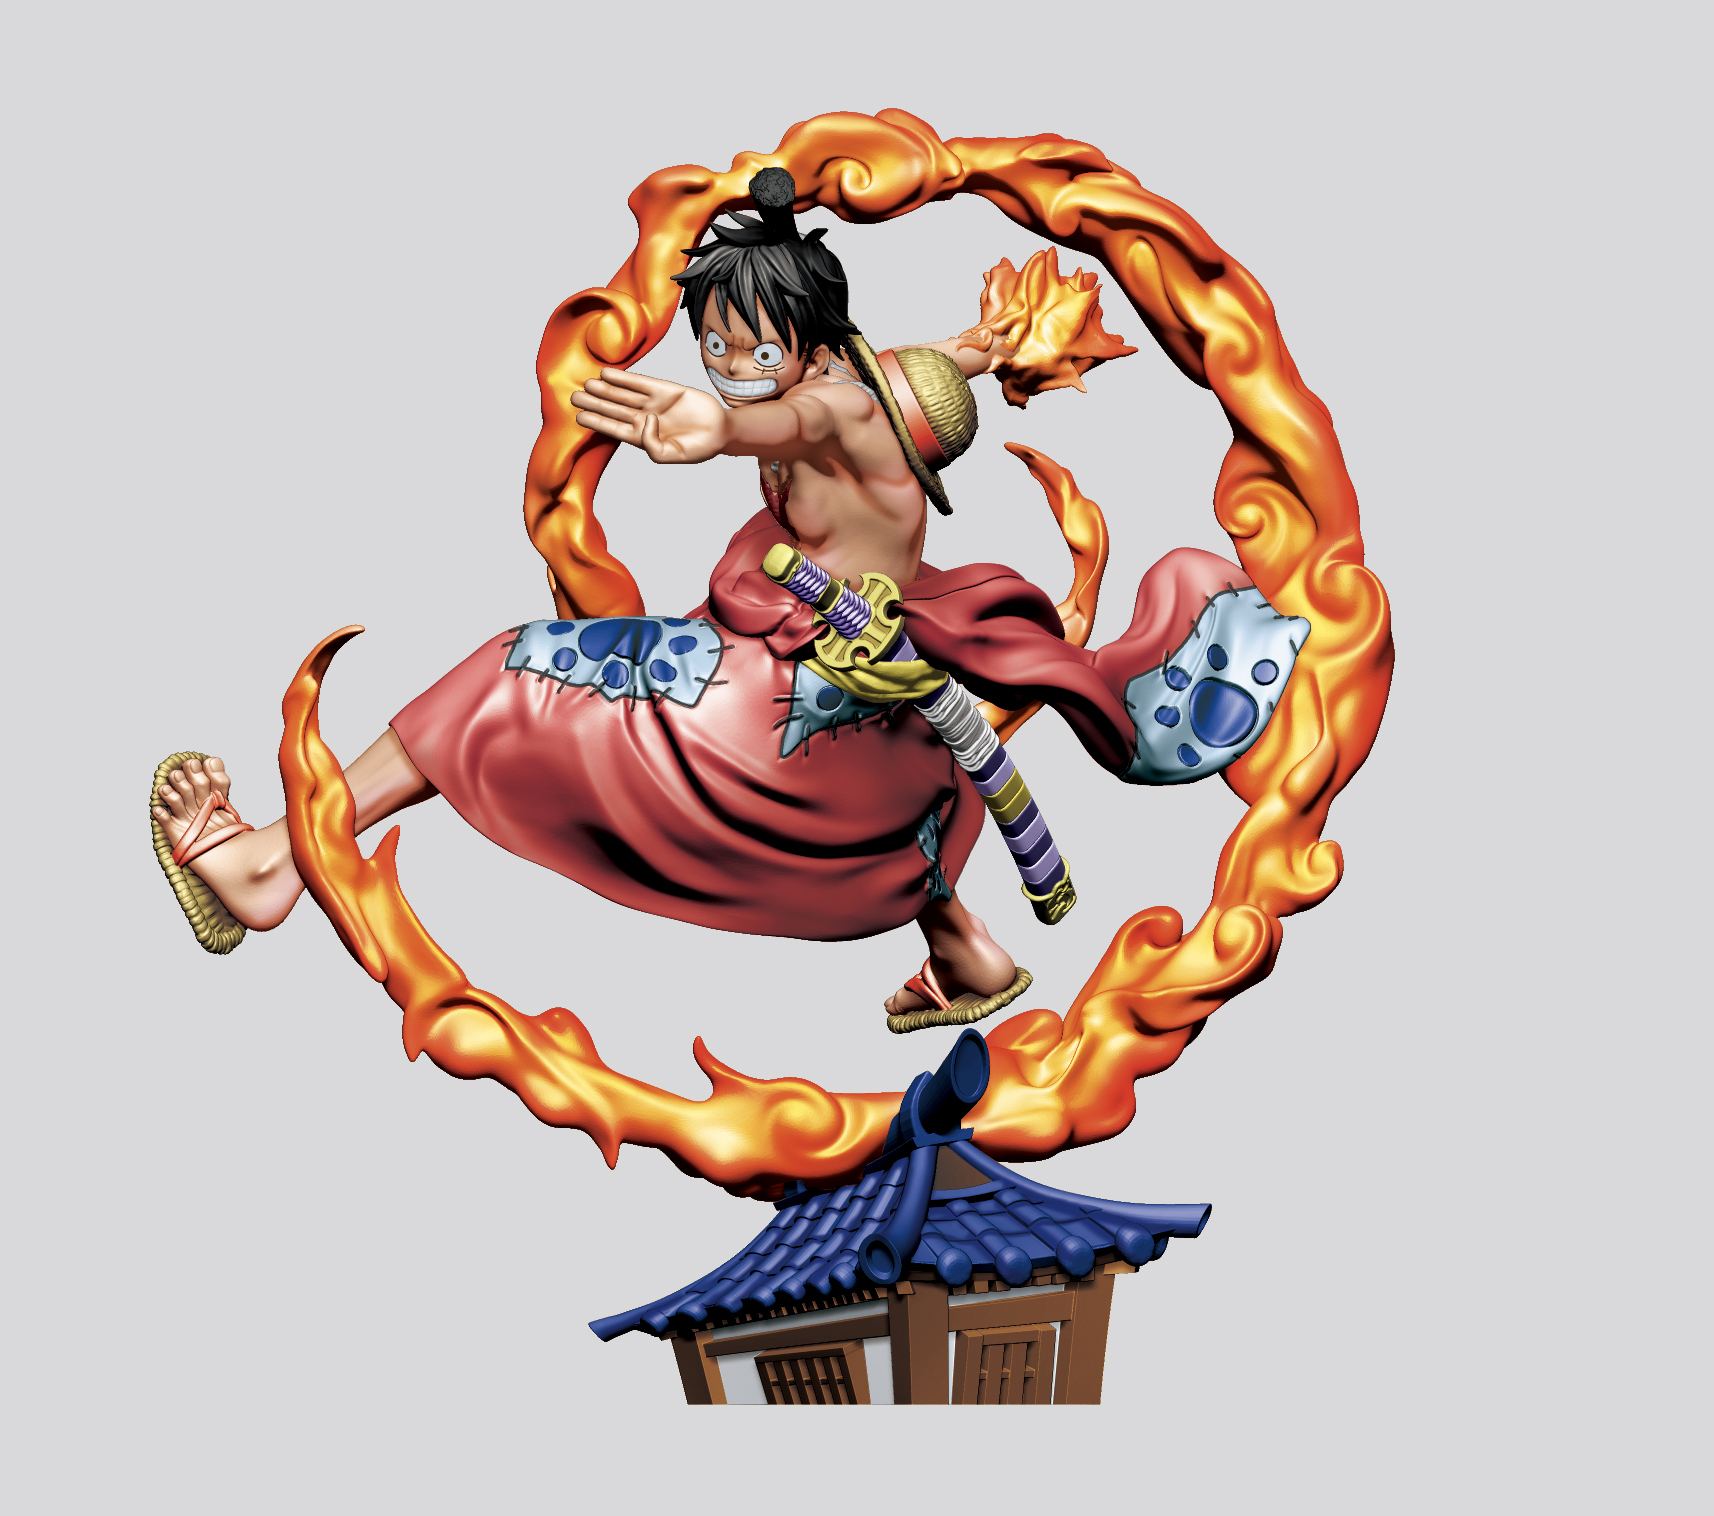 ONE PIECE LOGBOX RE:BIRTH WANO COUNTRY VER. VOL. 1 (SET OF 4 PIECES) Mega House